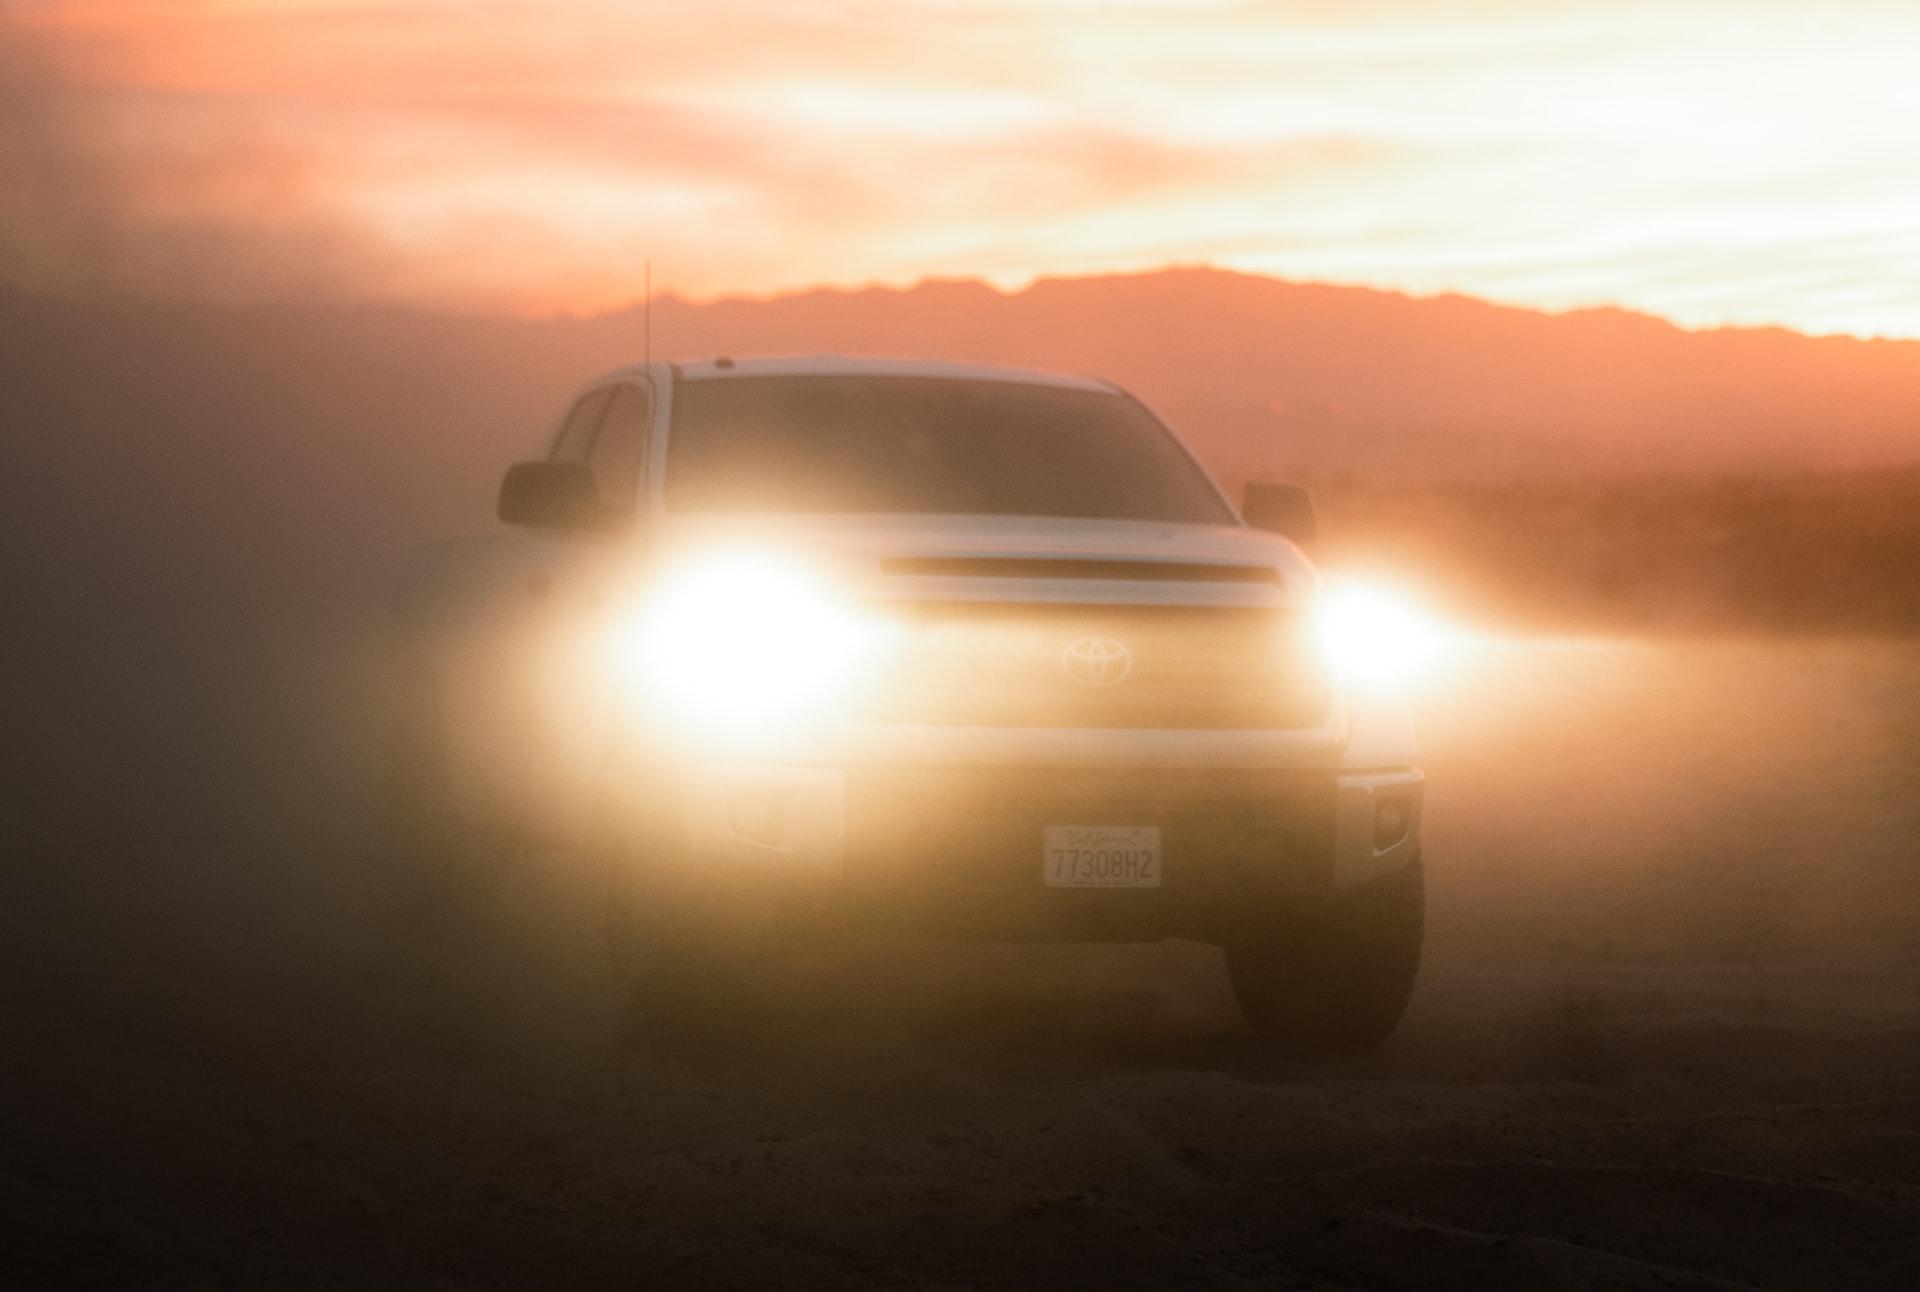 The Toyota Tundra is most loved for its fuel efficiency, reliability, and power.